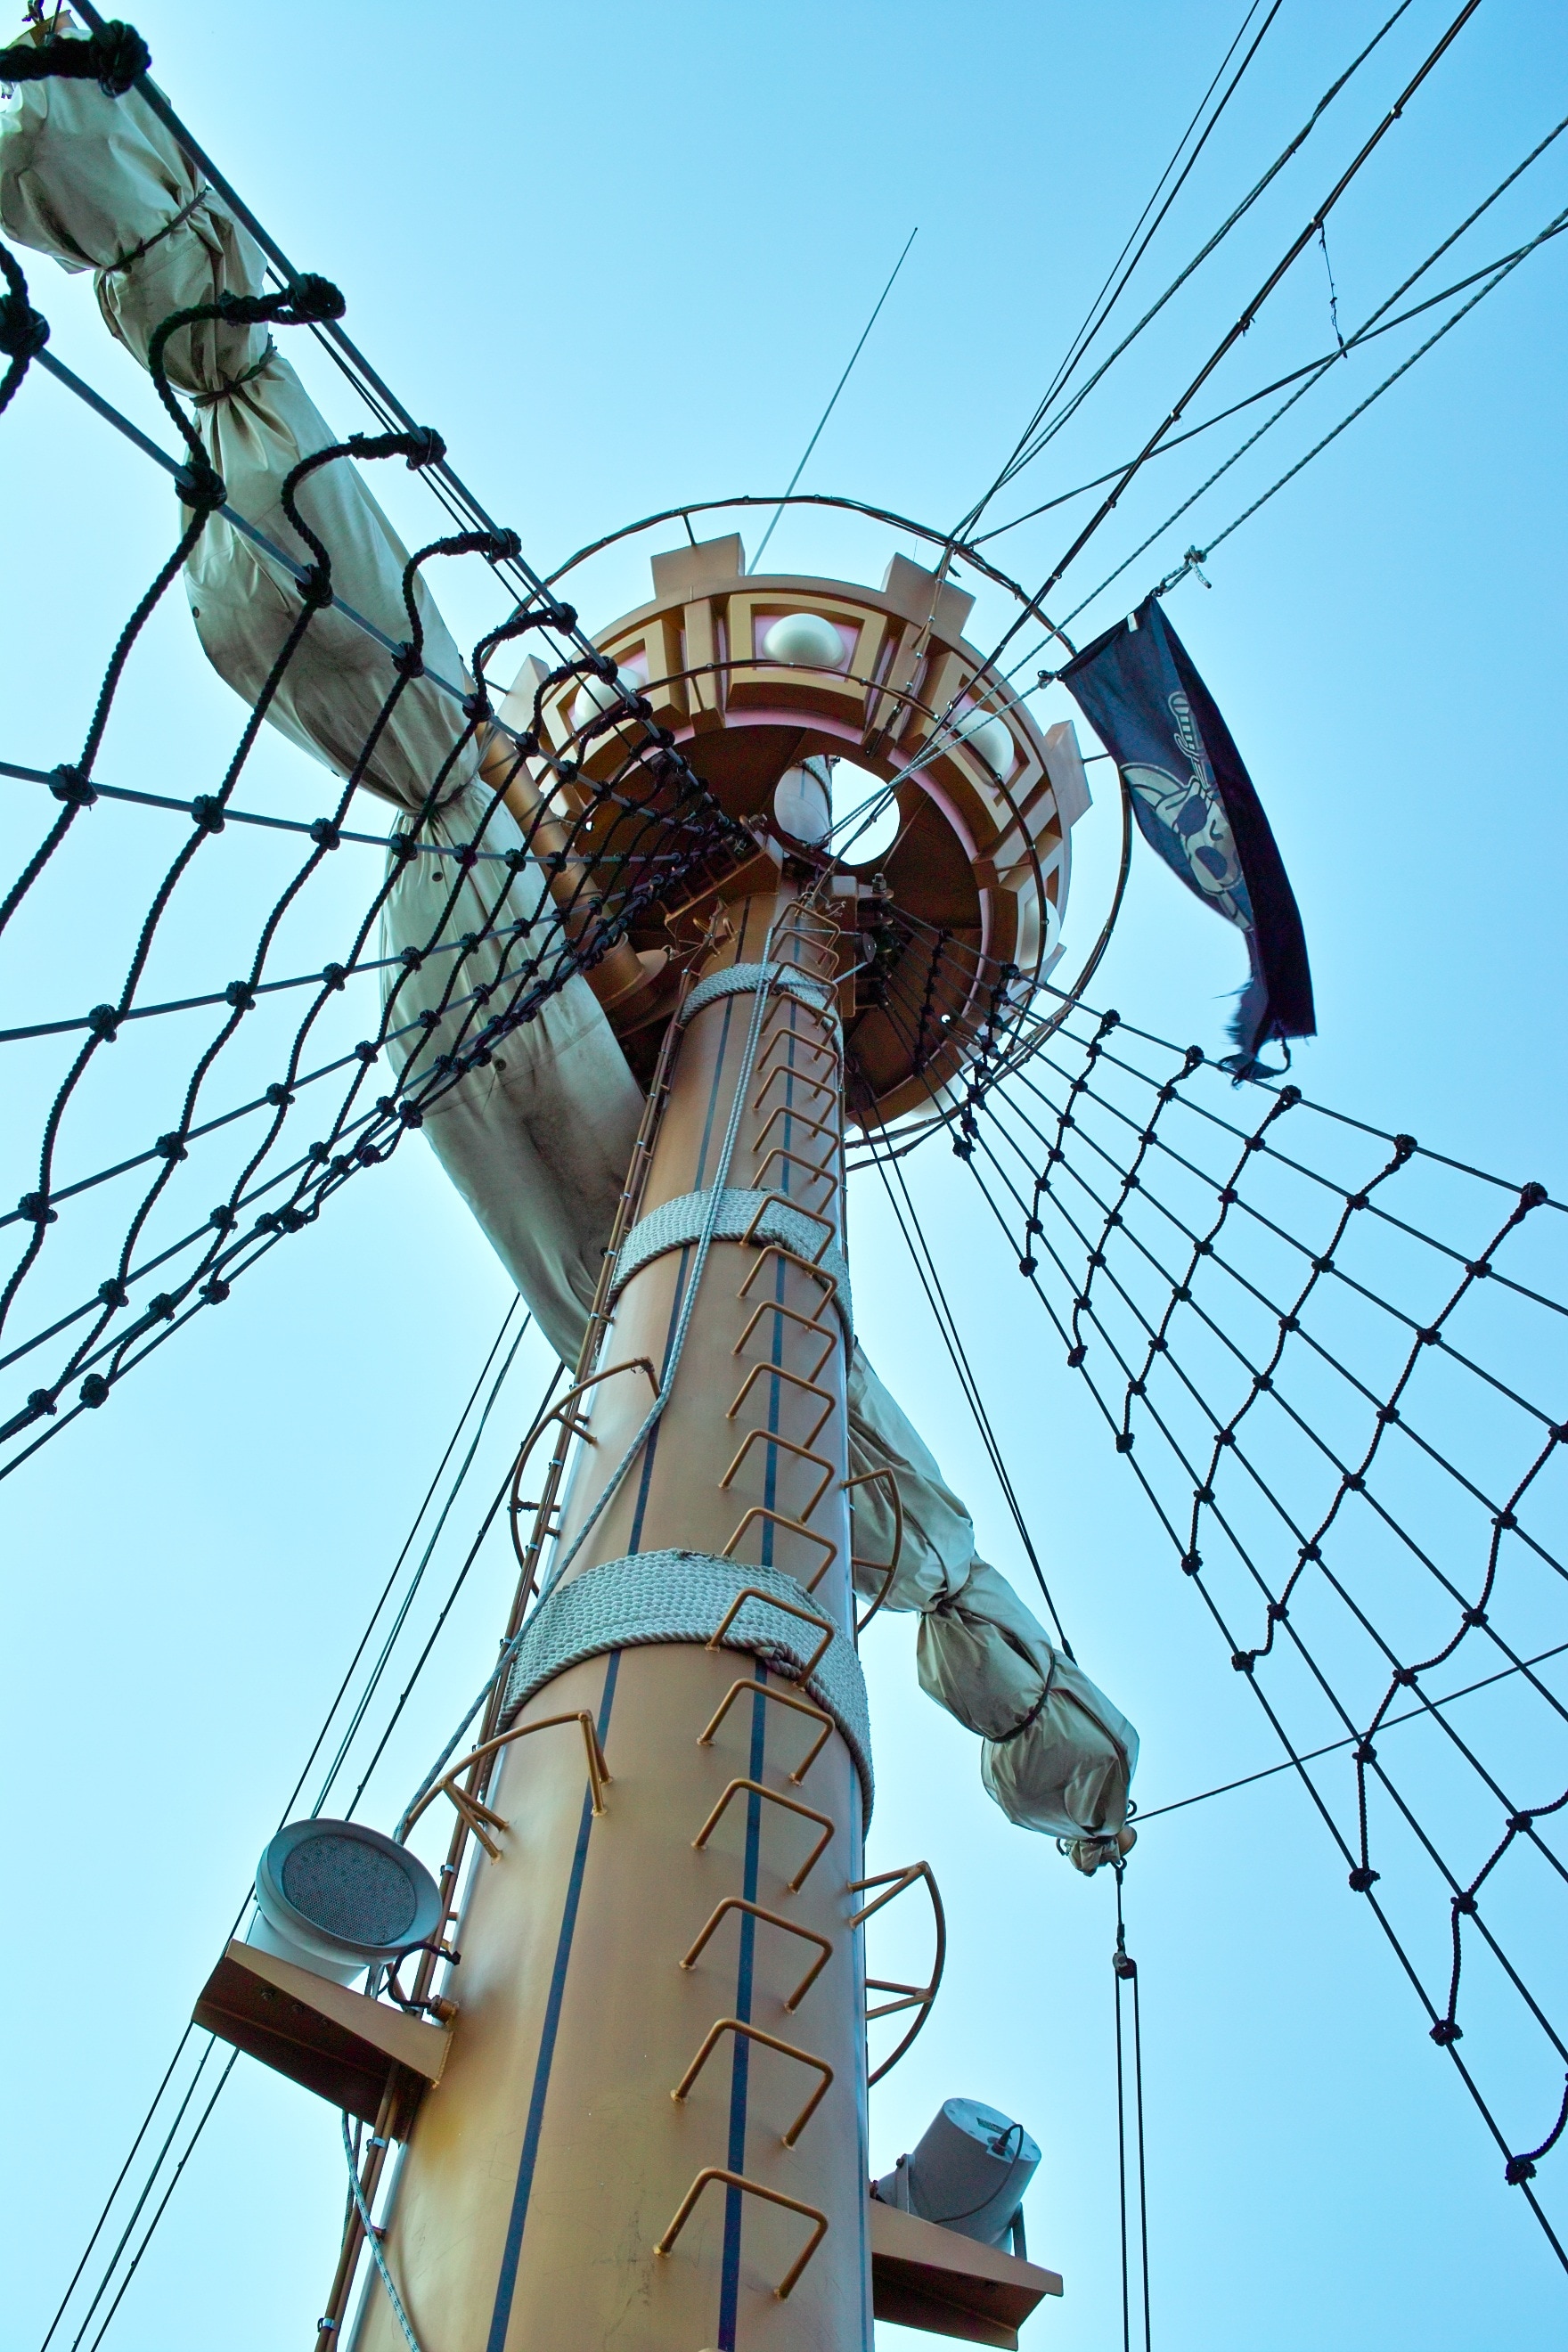 Mast, Pirate Ship, Pirate Flag, low angle view, industry